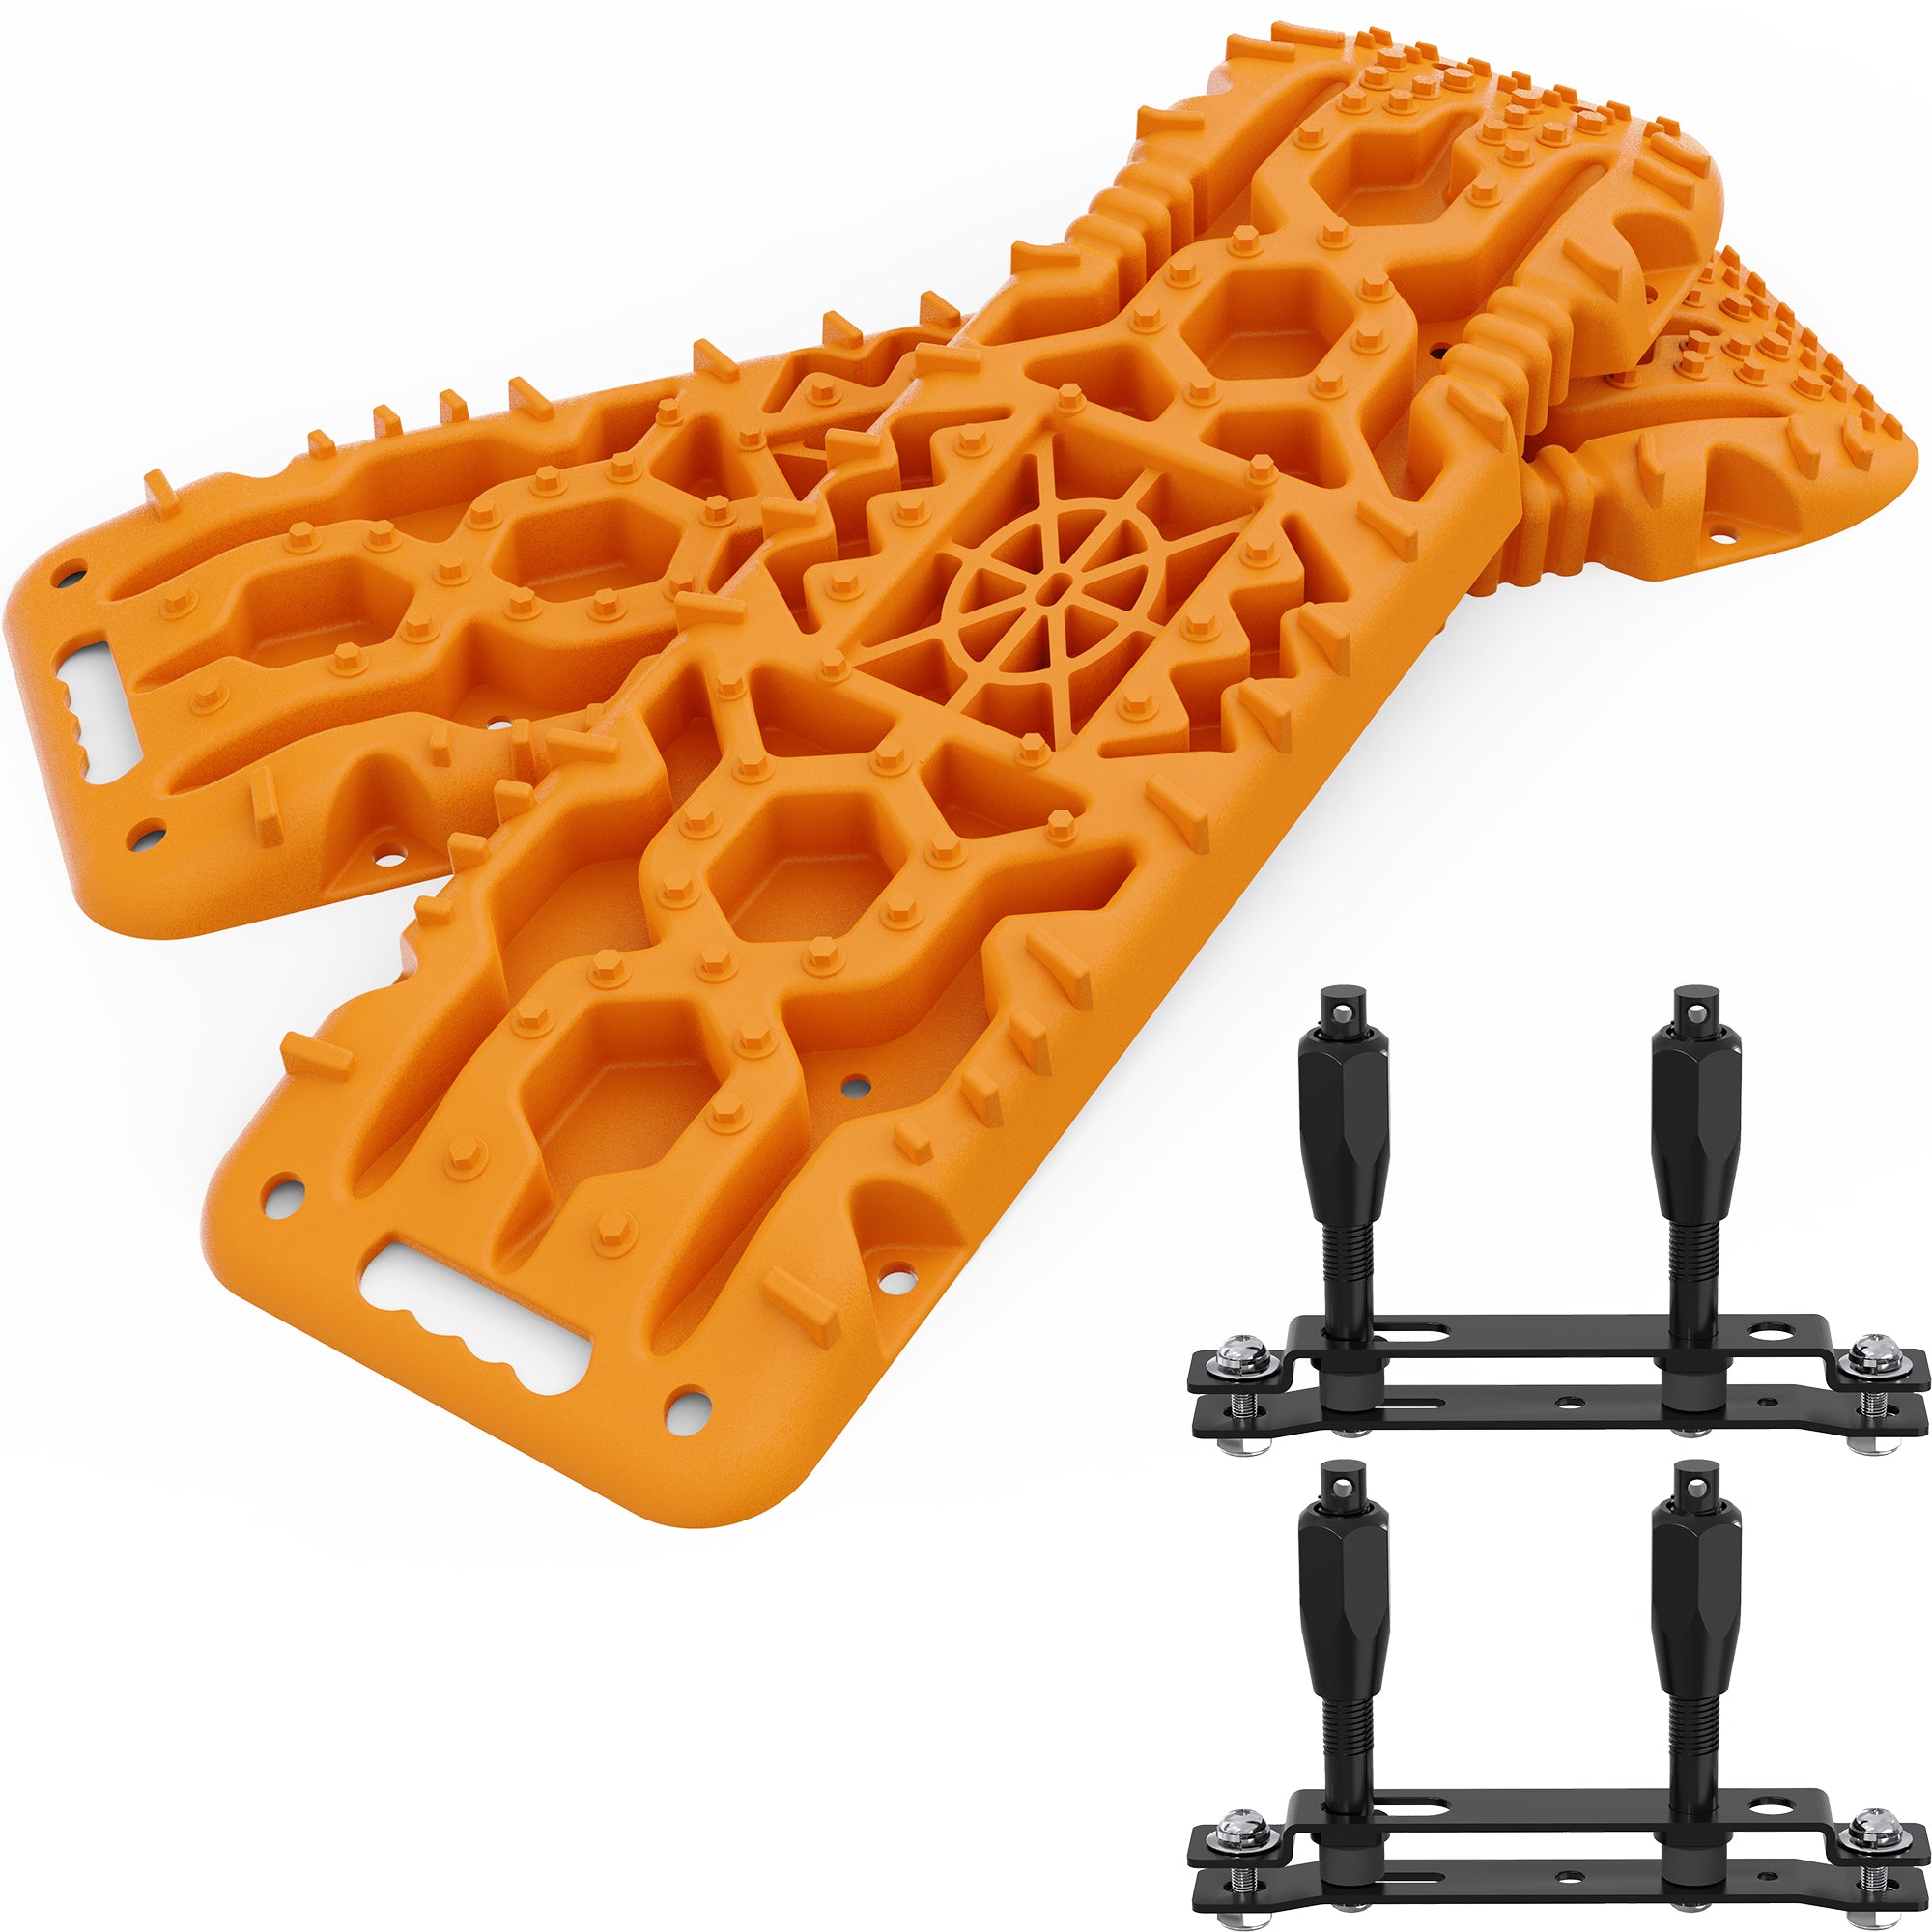 2Pcs Recovery Board with build-in Jack Base & Mounting Kit (Orange)